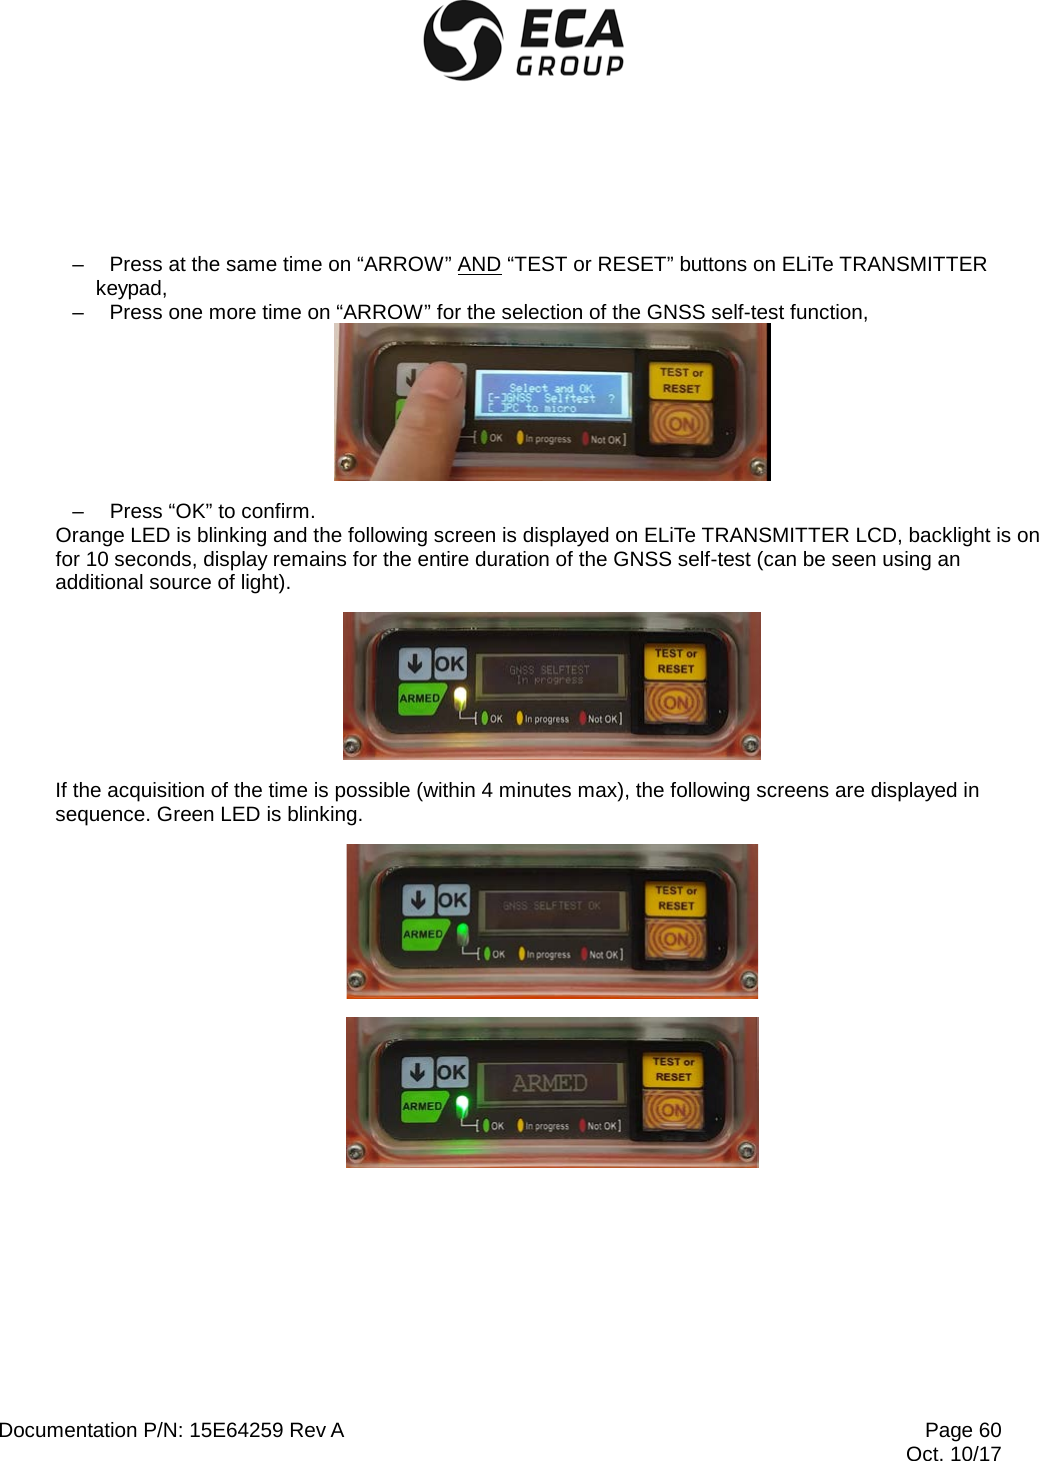  Documentation P/N: 15E64259 Rev A Page 60  Oct. 10/17  –  Press at the same time on “ARROW” AND “TEST or RESET” buttons on ELiTe TRANSMITTER keypad, –  Press one more time on “ARROW” for the selection of the GNSS self-test function,  –  Press “OK” to confirm. Orange LED is blinking and the following screen is displayed on ELiTe TRANSMITTER LCD, backlight is on for 10 seconds, display remains for the entire duration of the GNSS self-test (can be seen using an additional source of light).  If the acquisition of the time is possible (within 4 minutes max), the following screens are displayed in sequence. Green LED is blinking.   